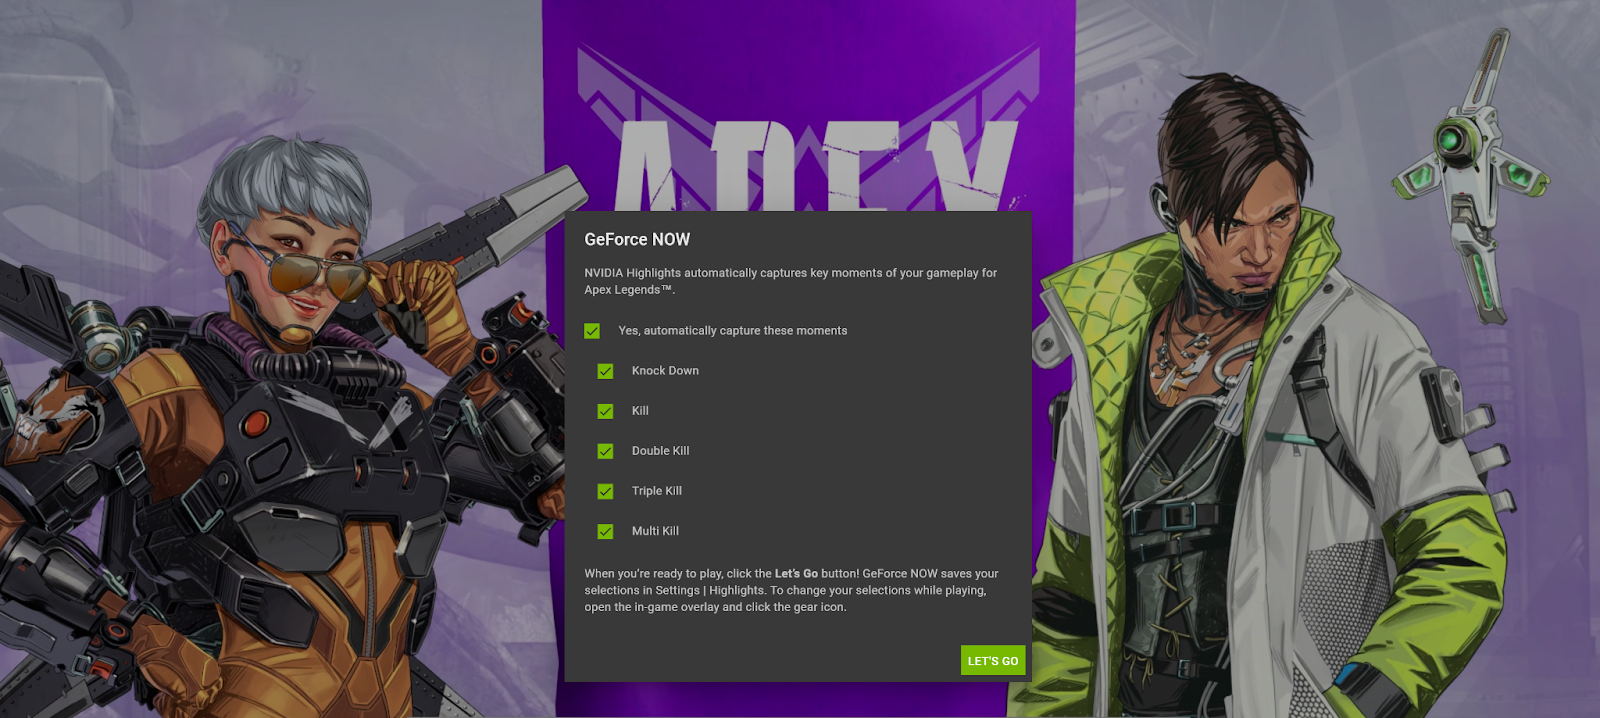 how to play apex legends on nvidia geforce now